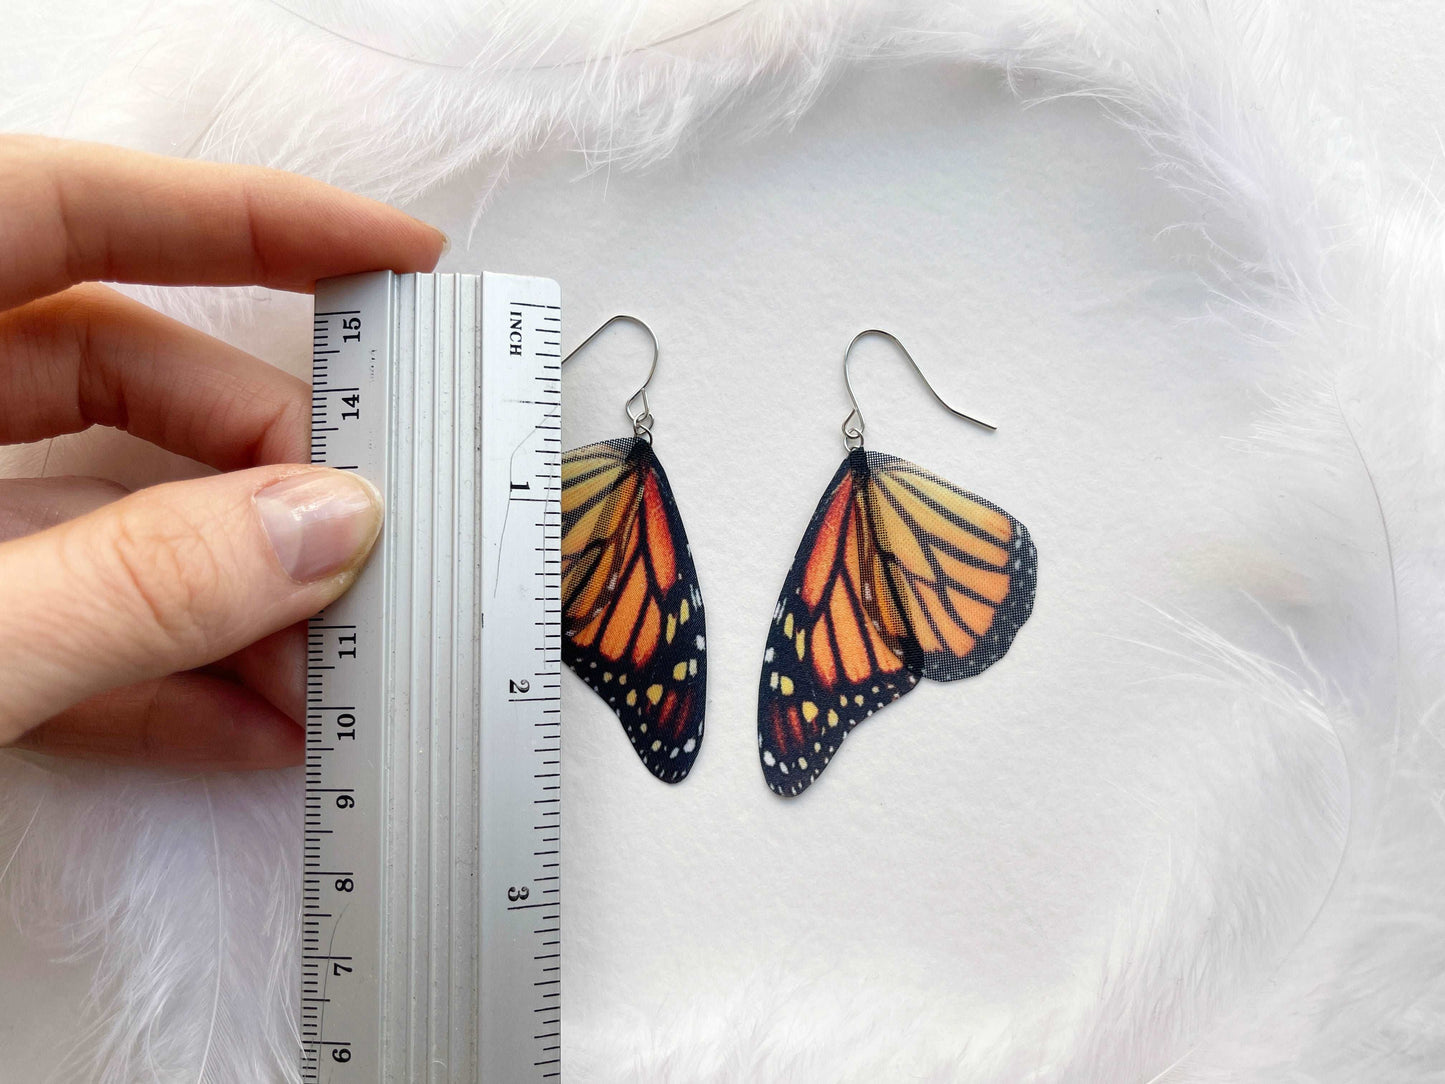 Cool Earrings with intricate Monarch Butterfly Wing design